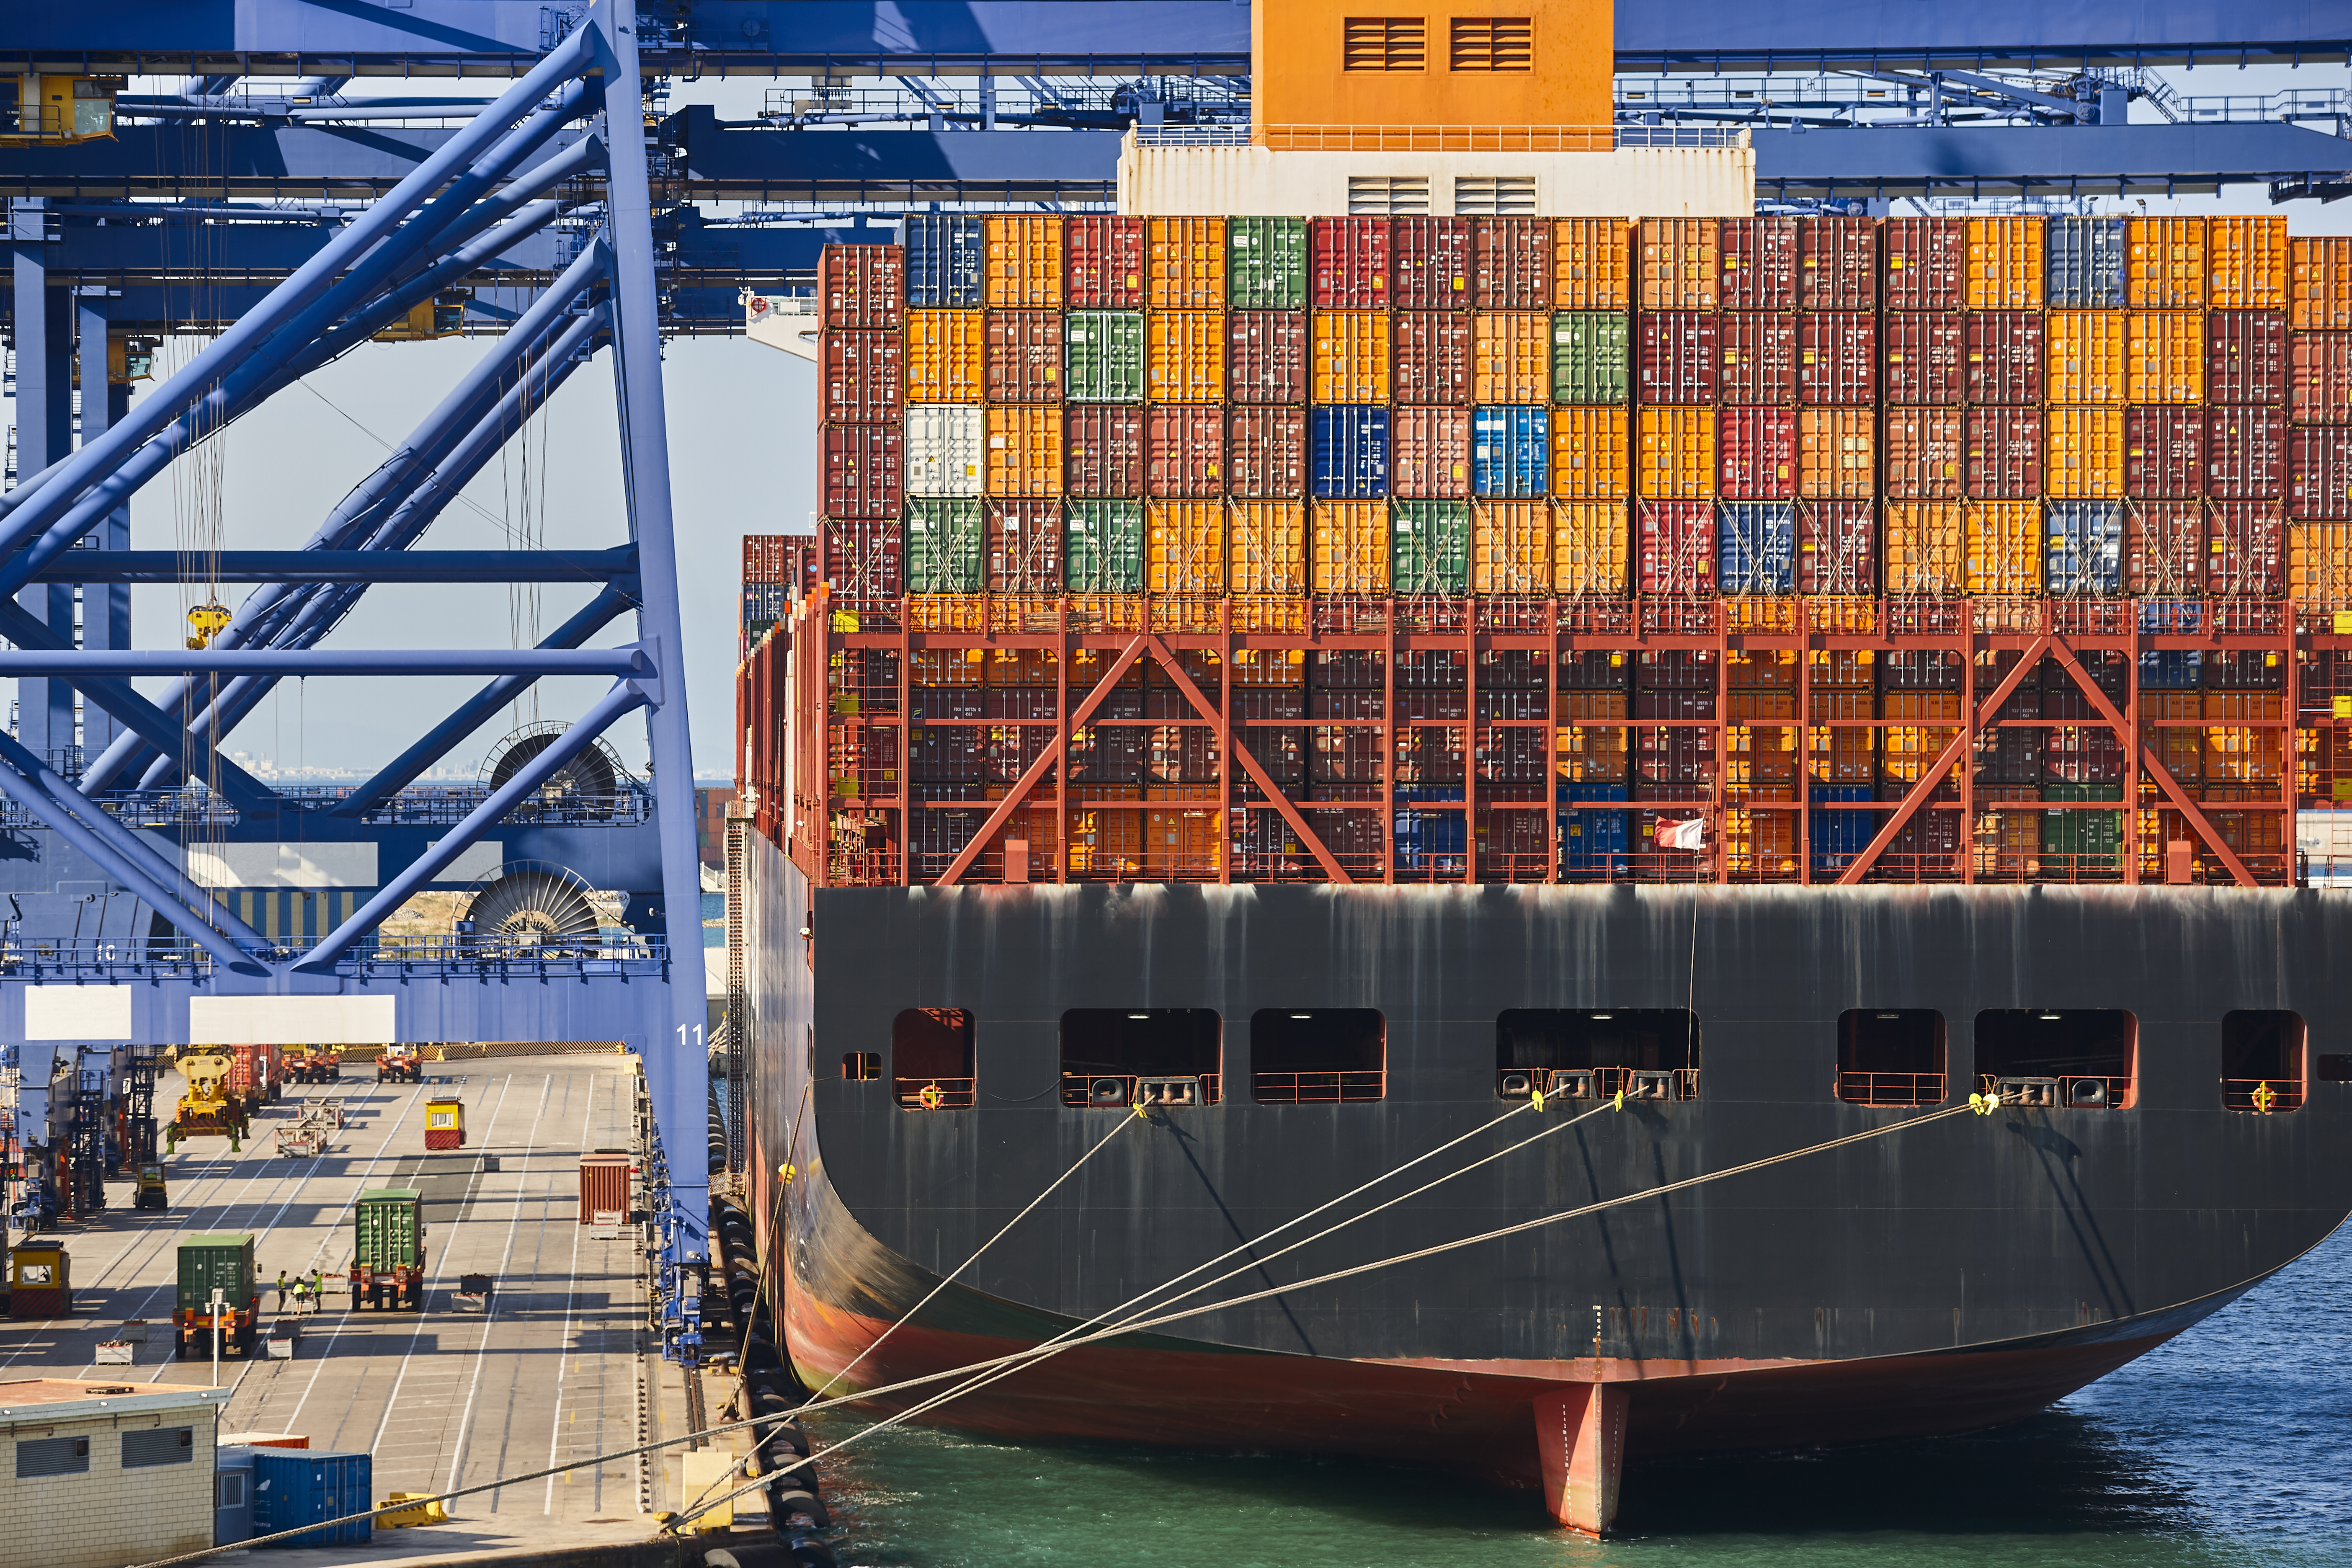 containers-on-a-vessel-global-market-cargo-shipp-2022-06-29-20-30-54-utc